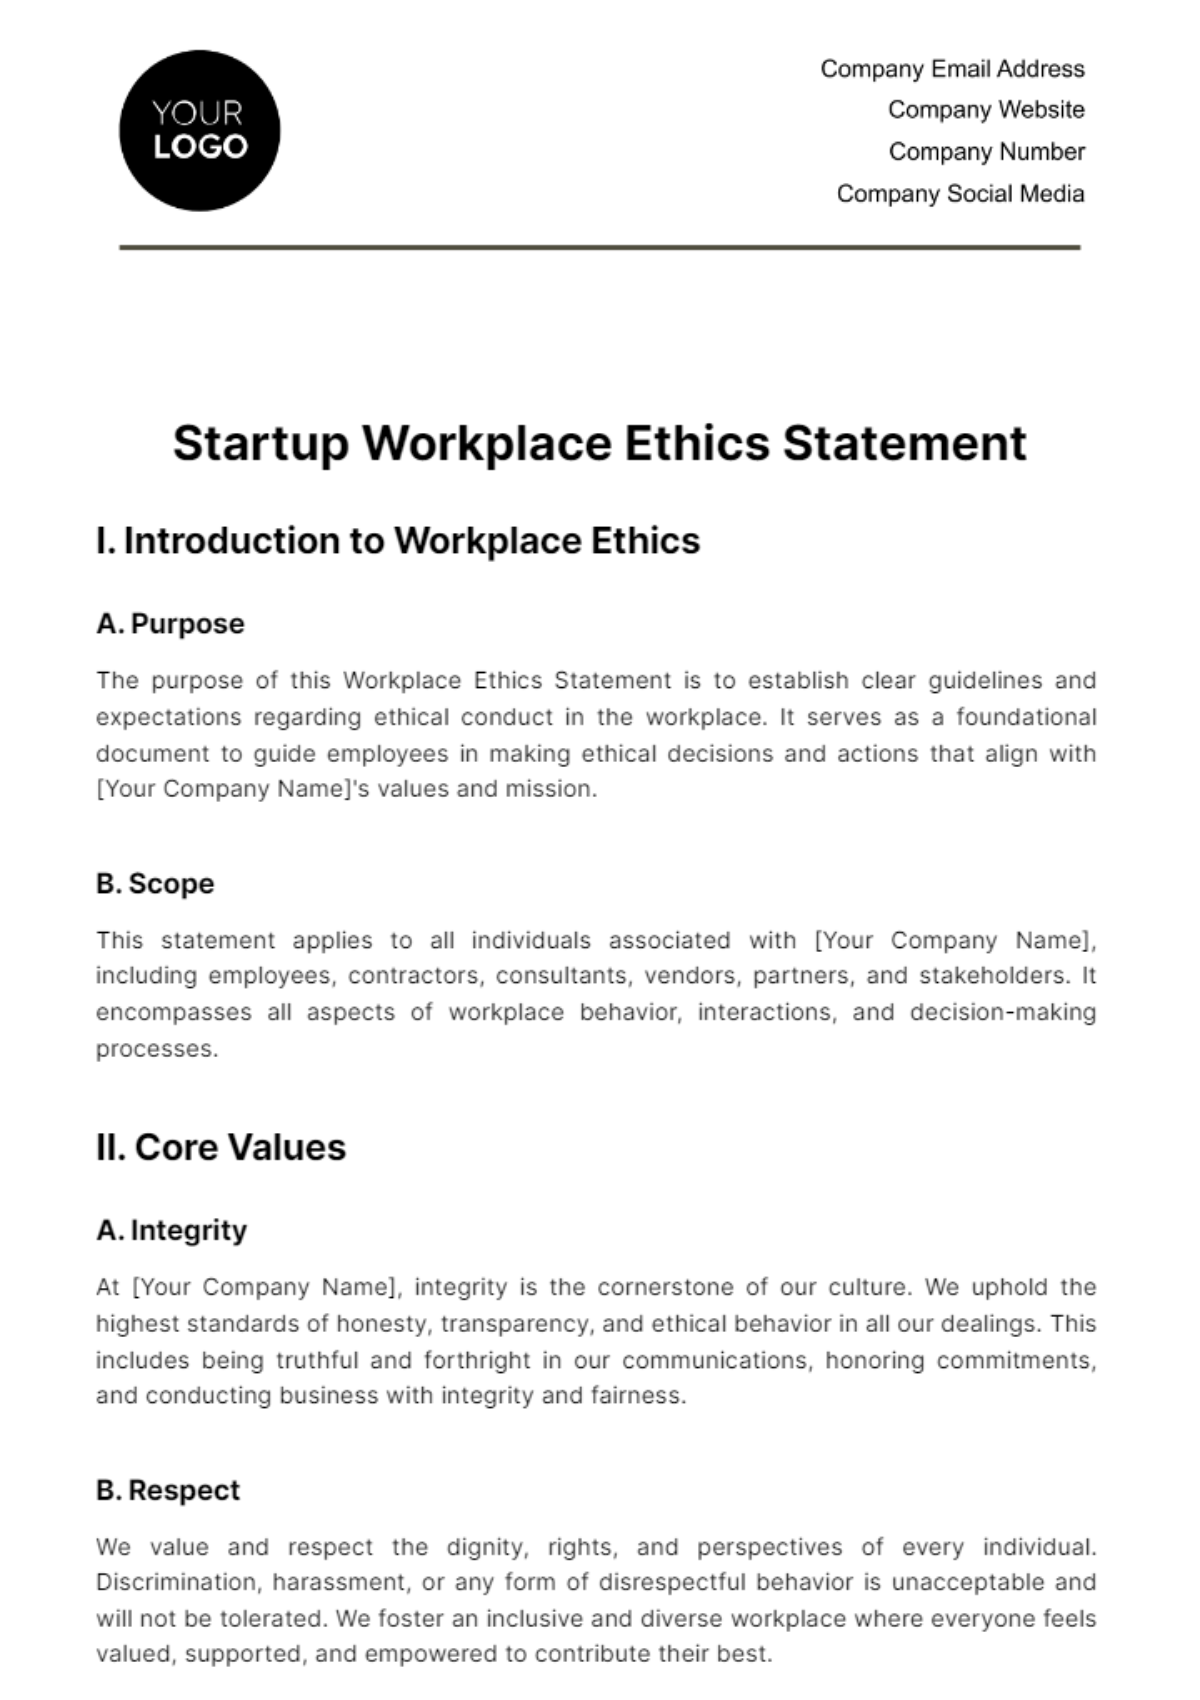 Free Startup Workplace Ethics Statement Template